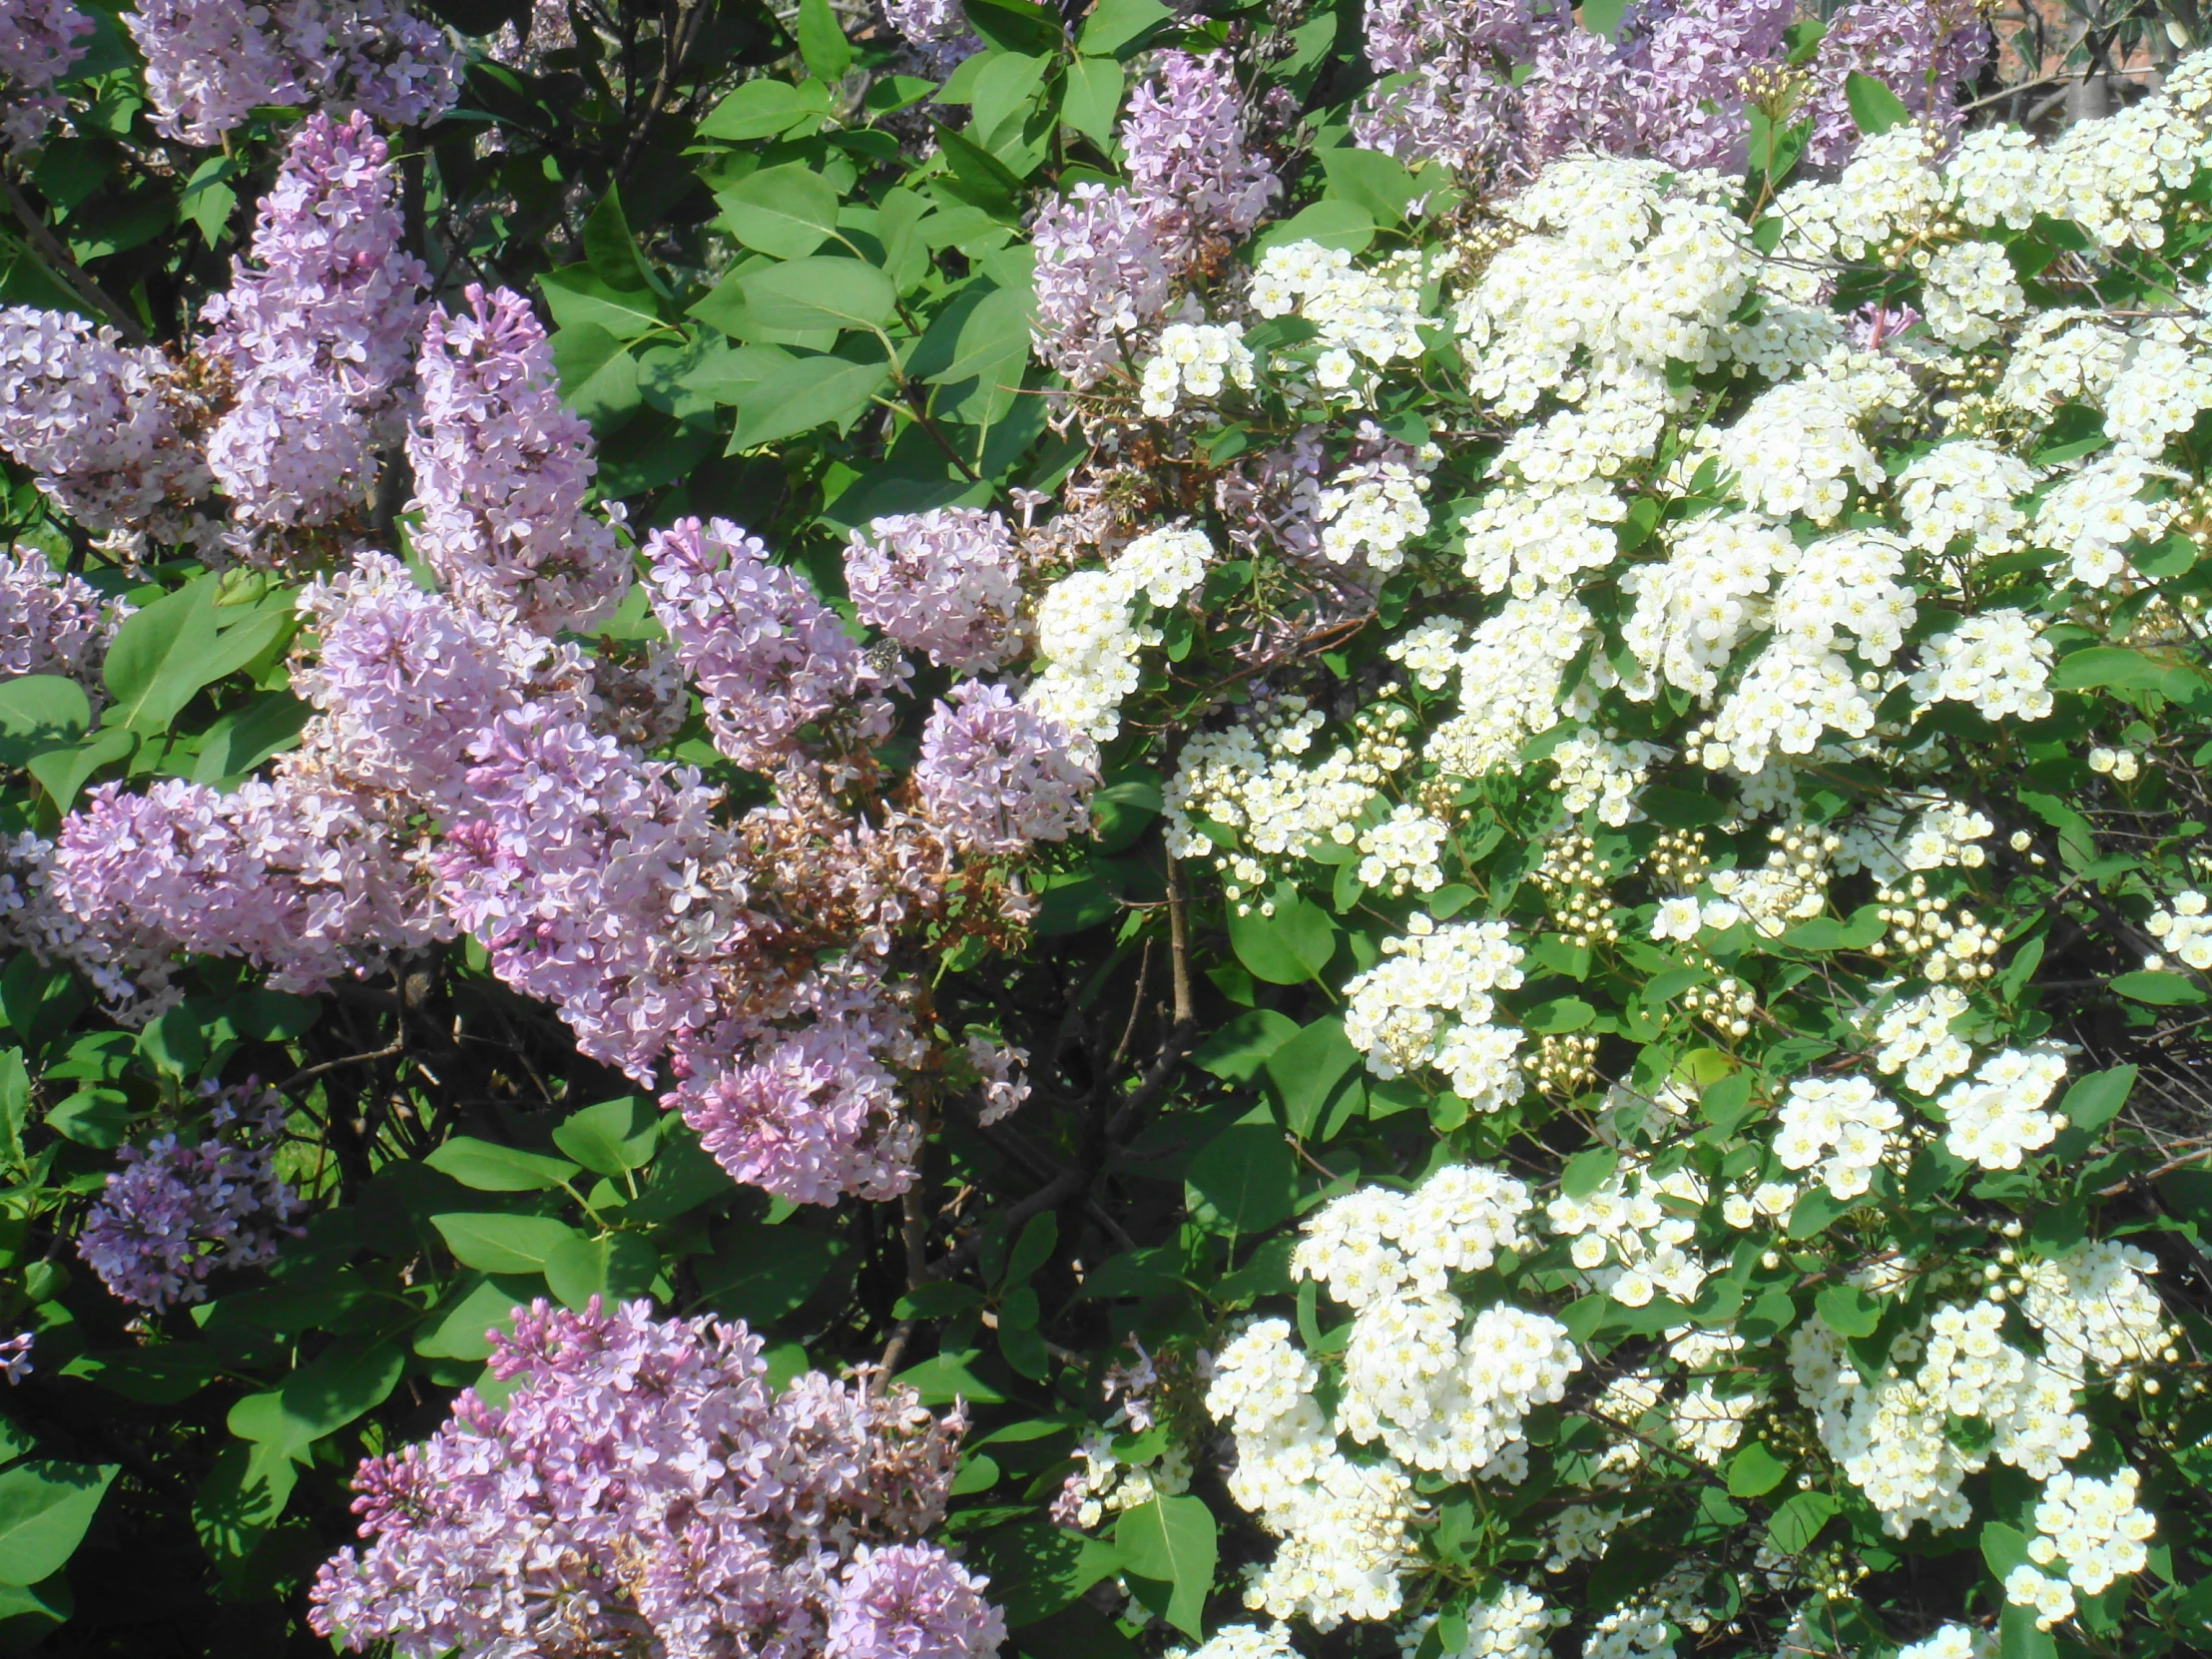 flowers blooming in various white and pink colors